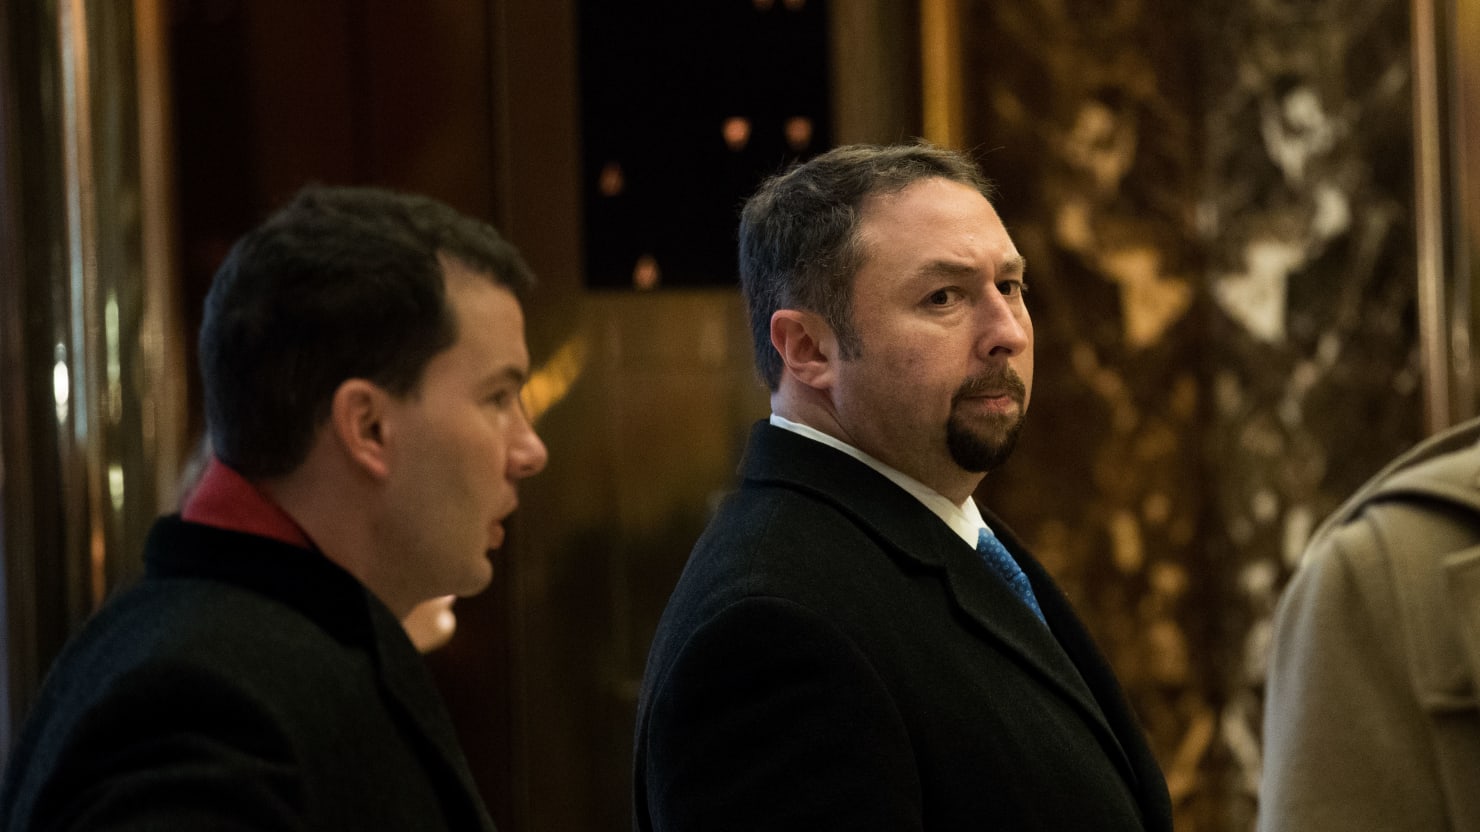 Trump Campaign Adviser Jason Miller Flips Out When Jake Tapper Calls Him Out Over Child Support